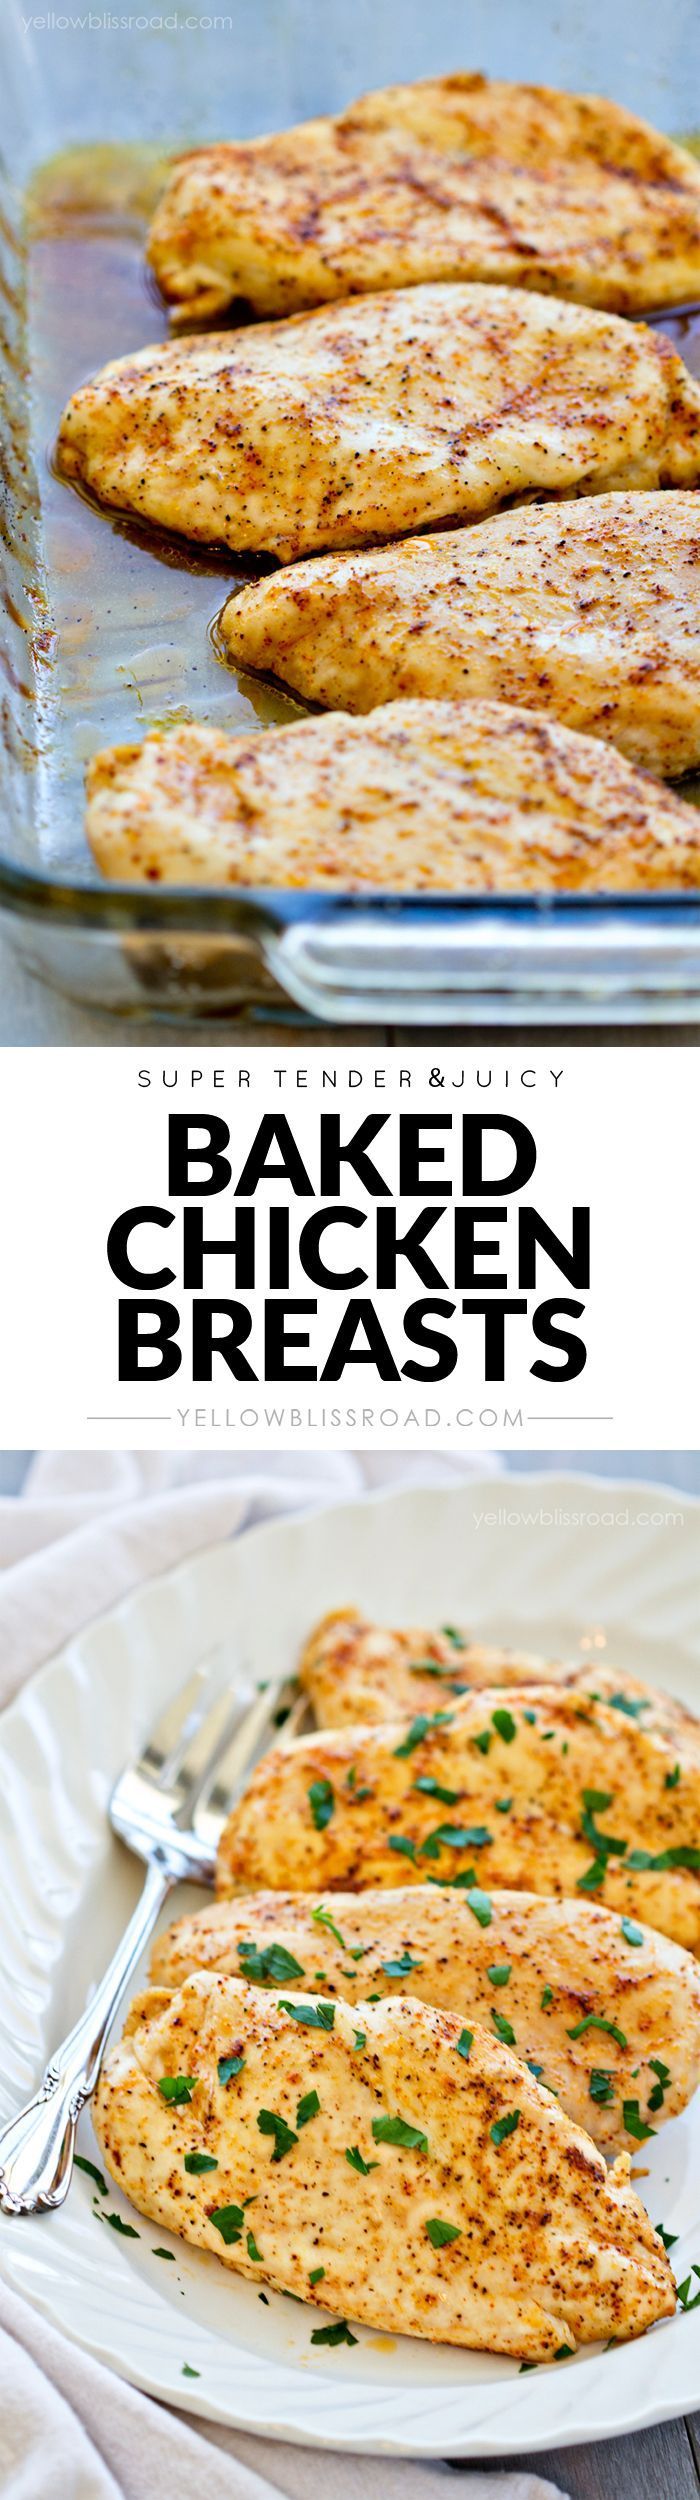 Tender & Juicy Baked Chicken Breasts - No more dry chicken!